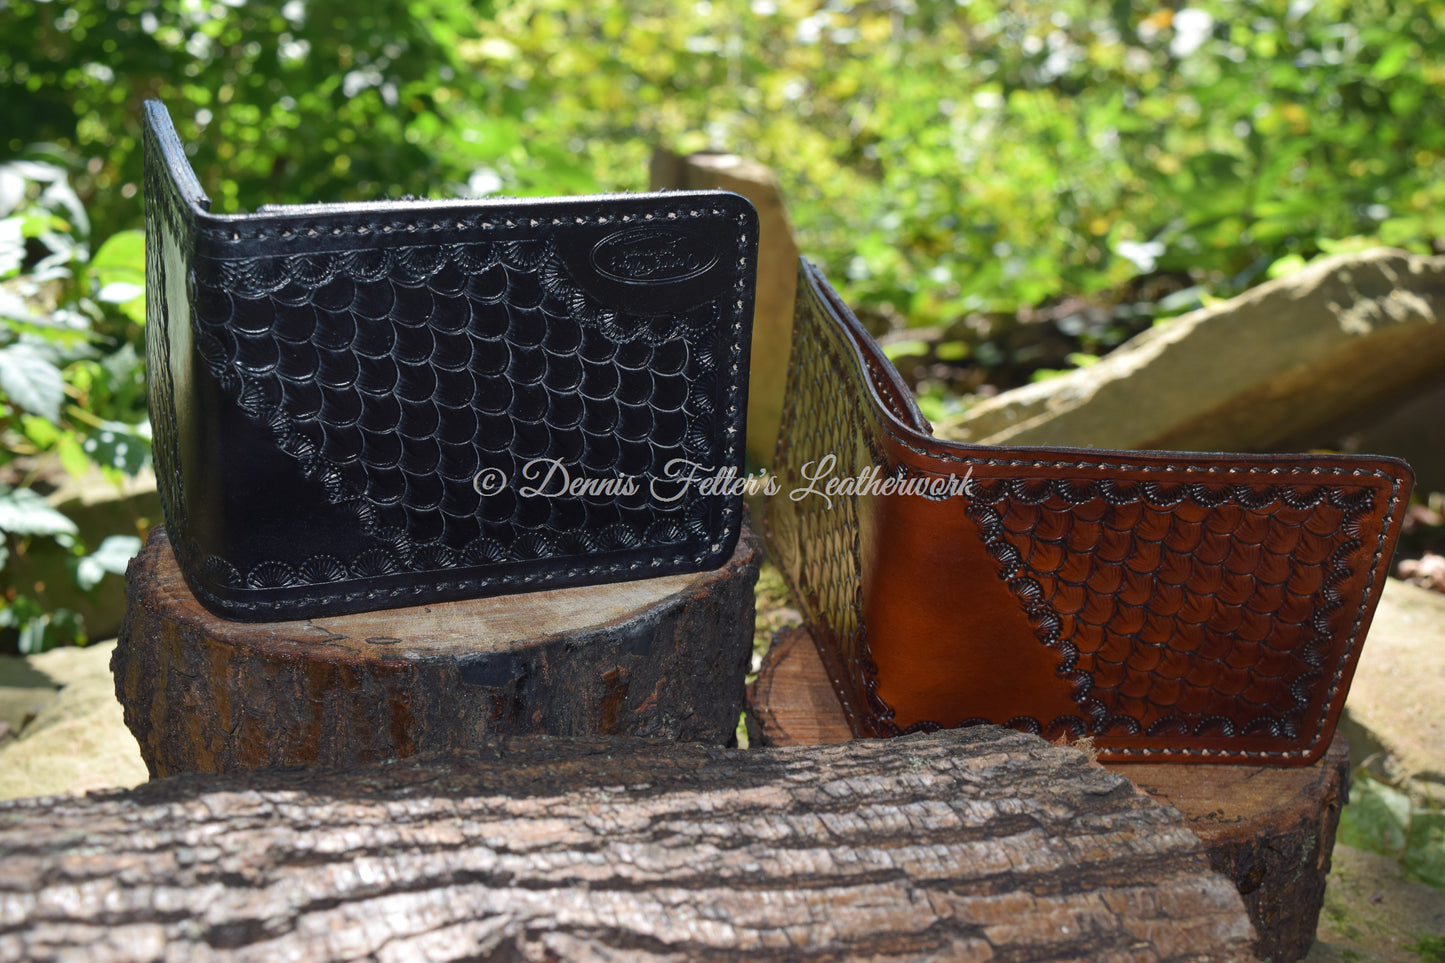 Another view of the black and brown leather wallets showing the exterior stamping